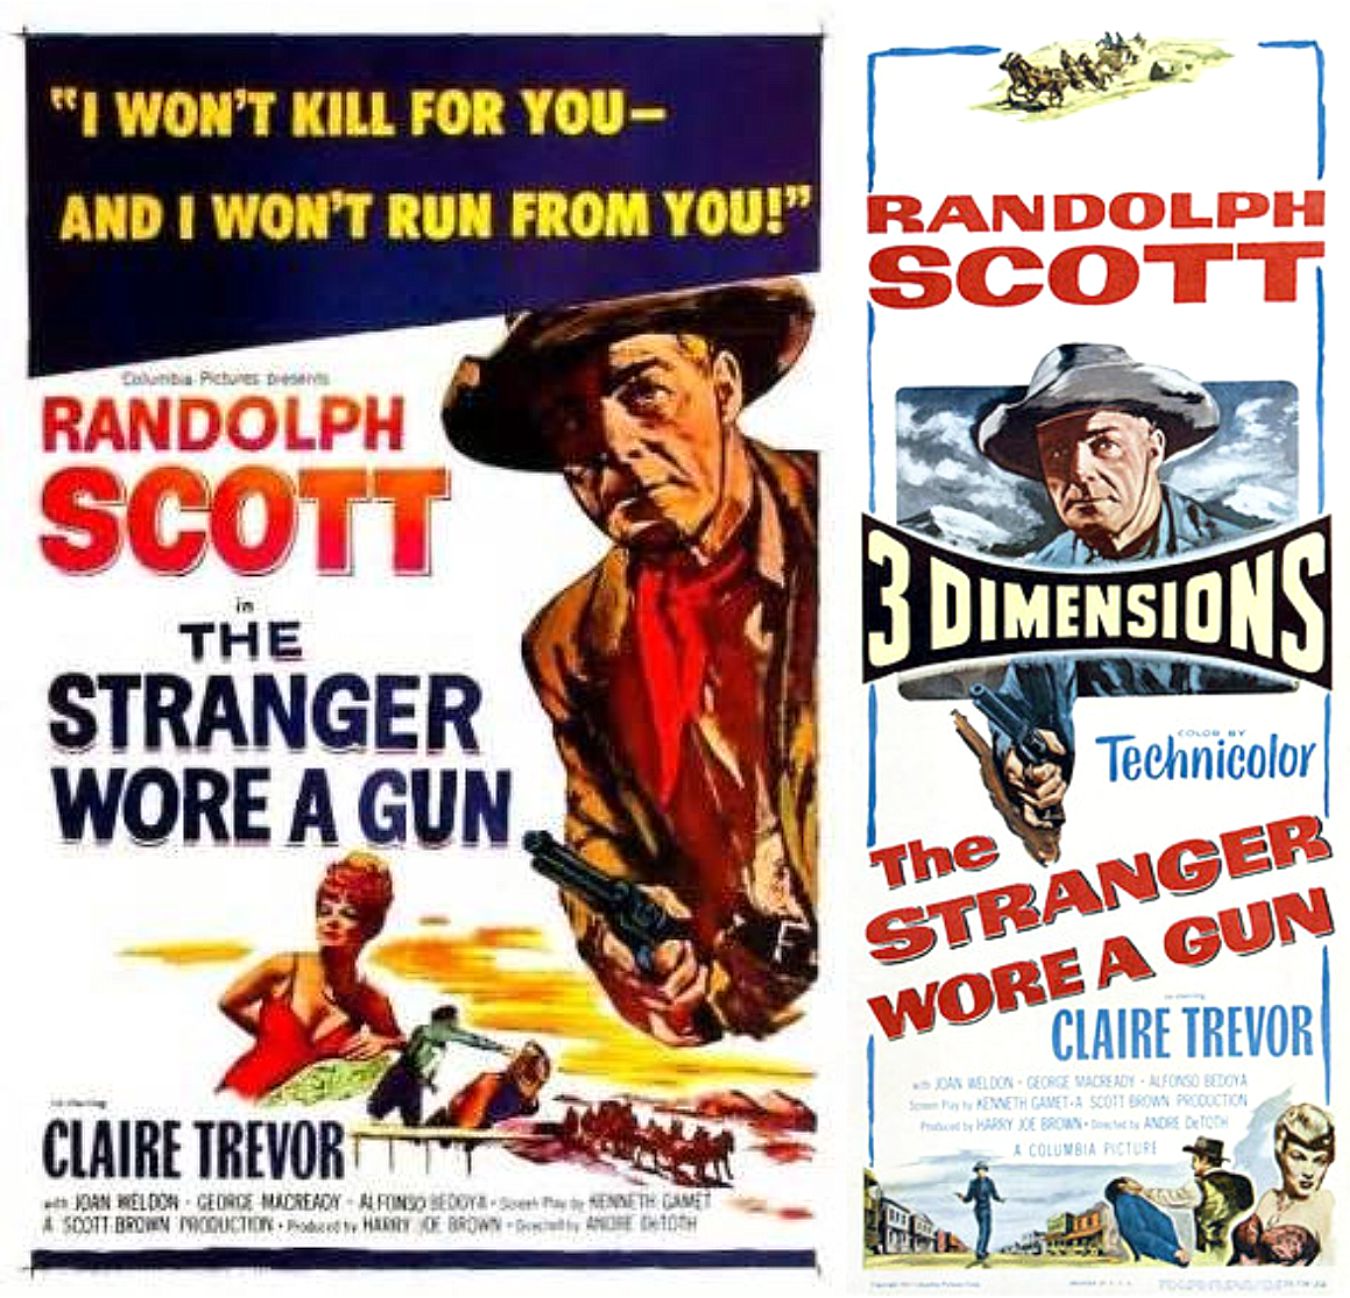 The Stranger Wore a Gun posters 1953